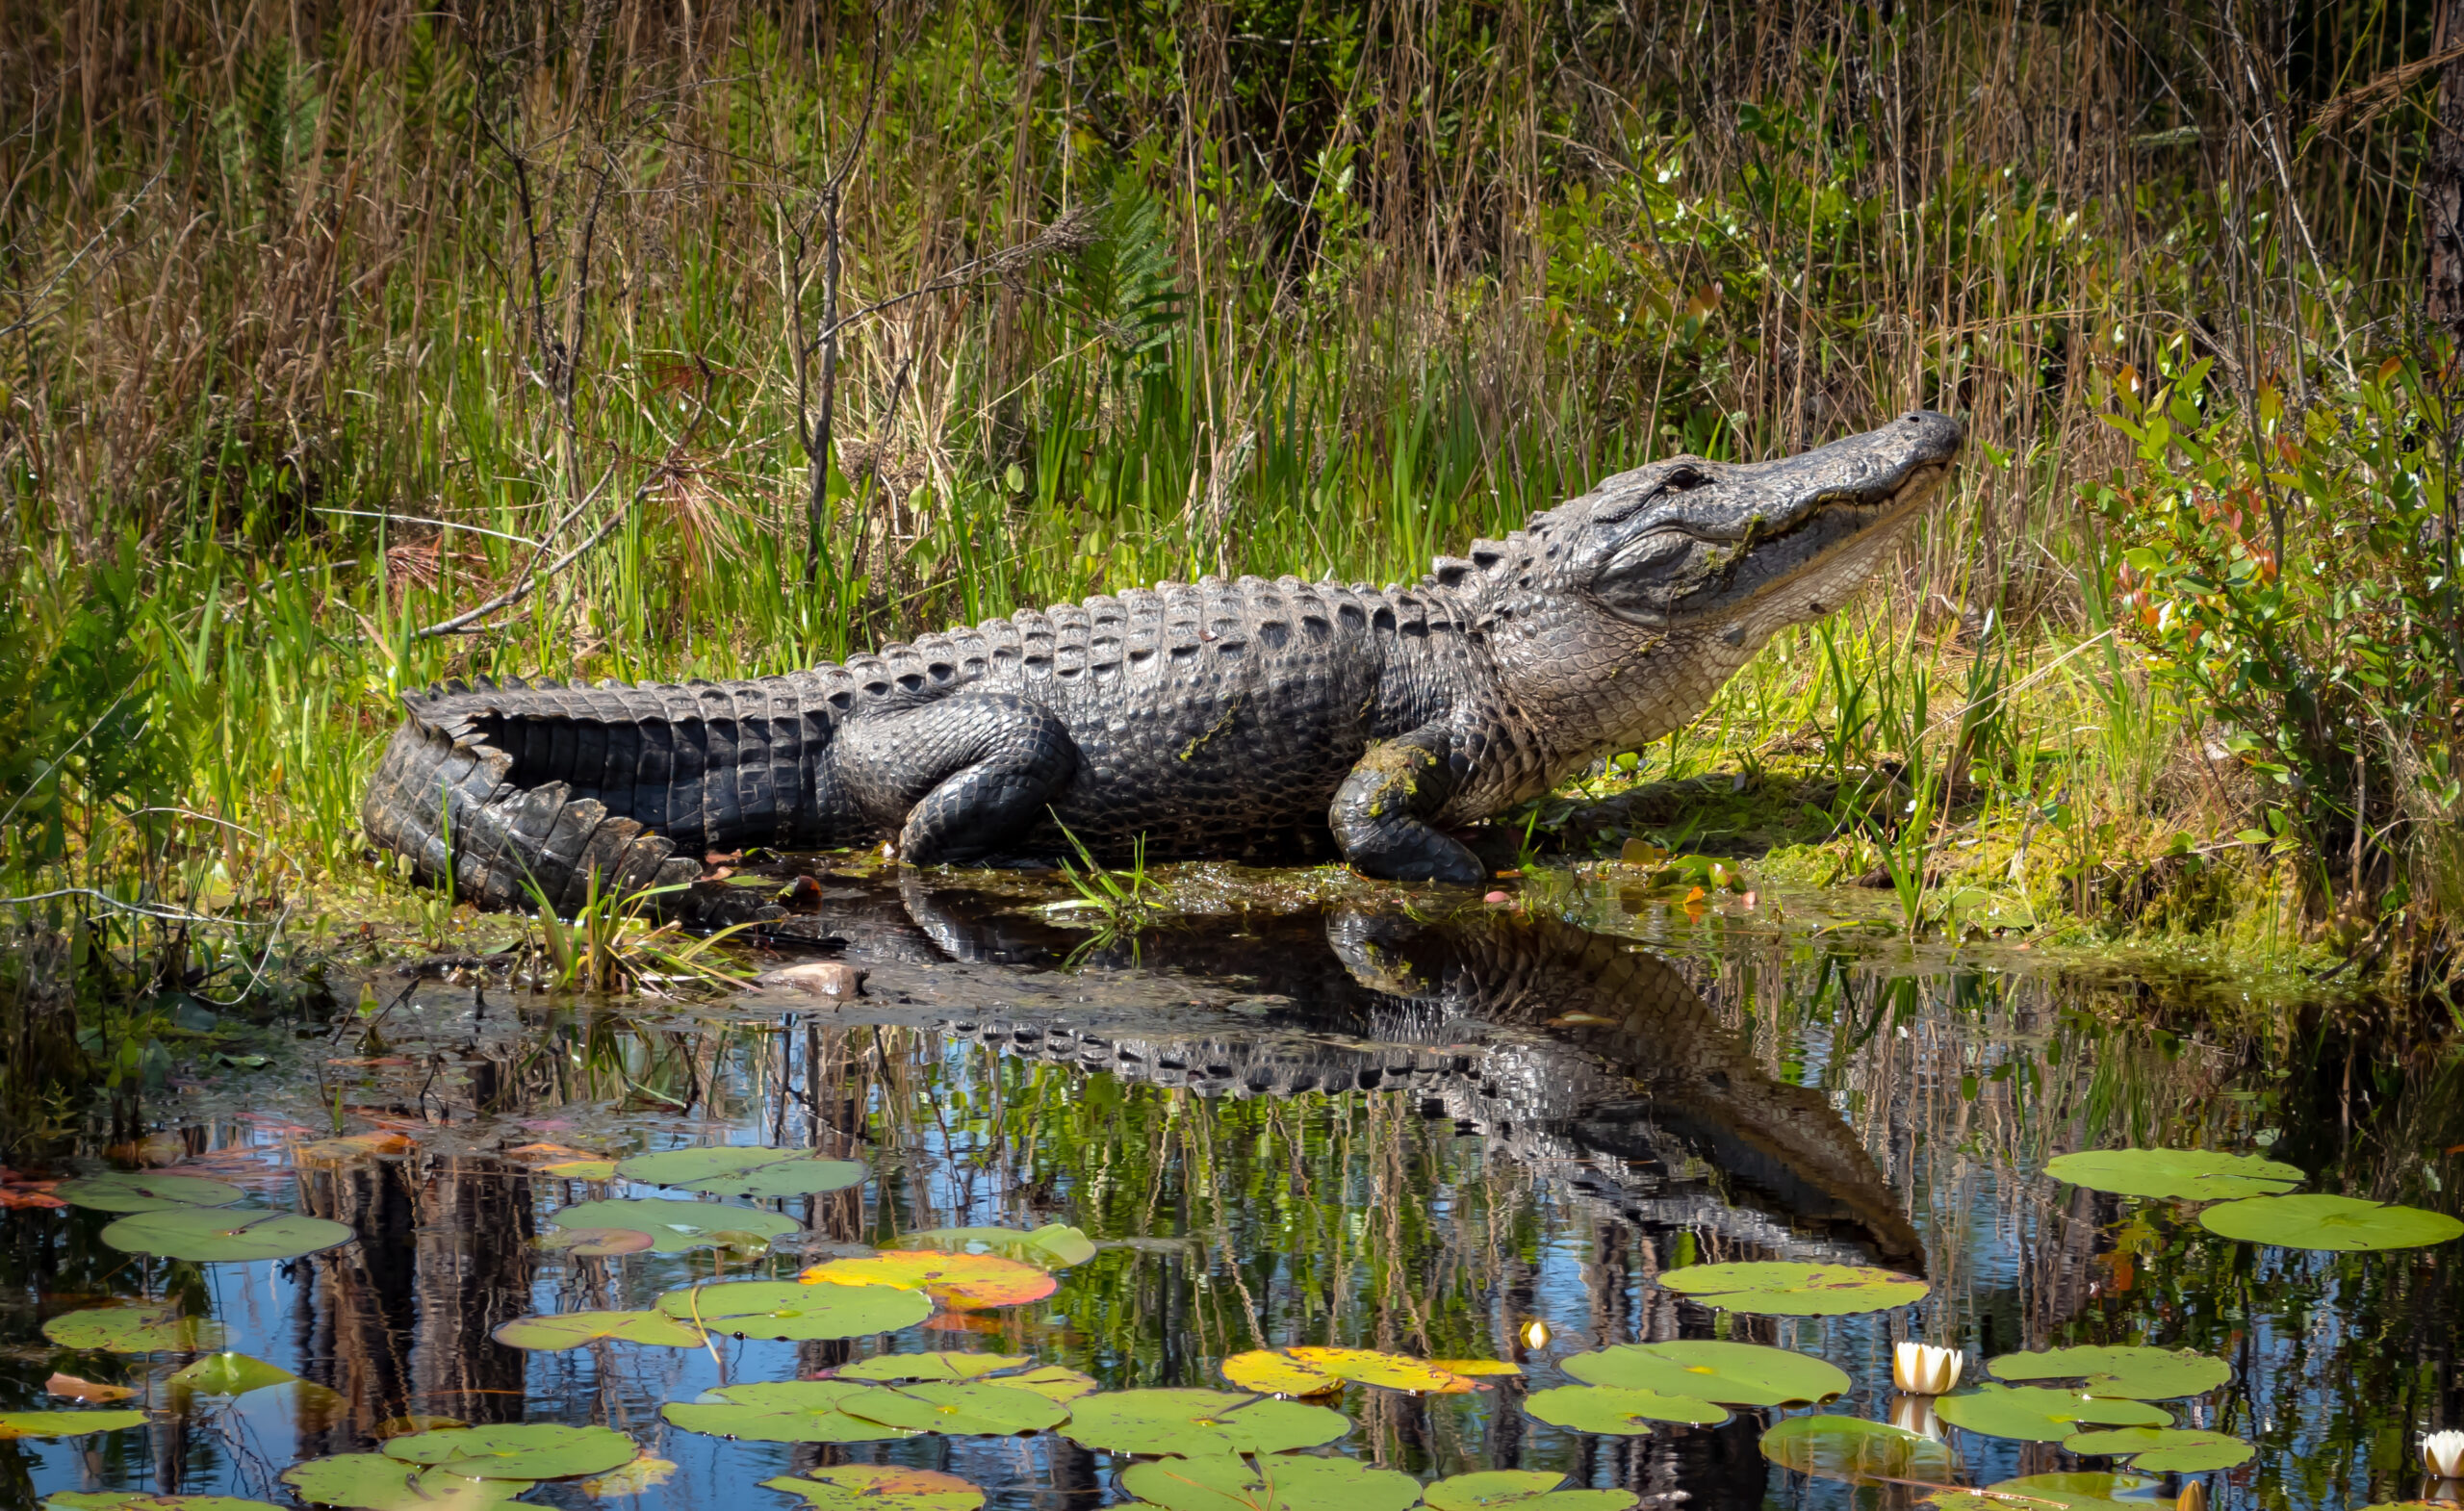 Photograph of an alligator in a swamp.